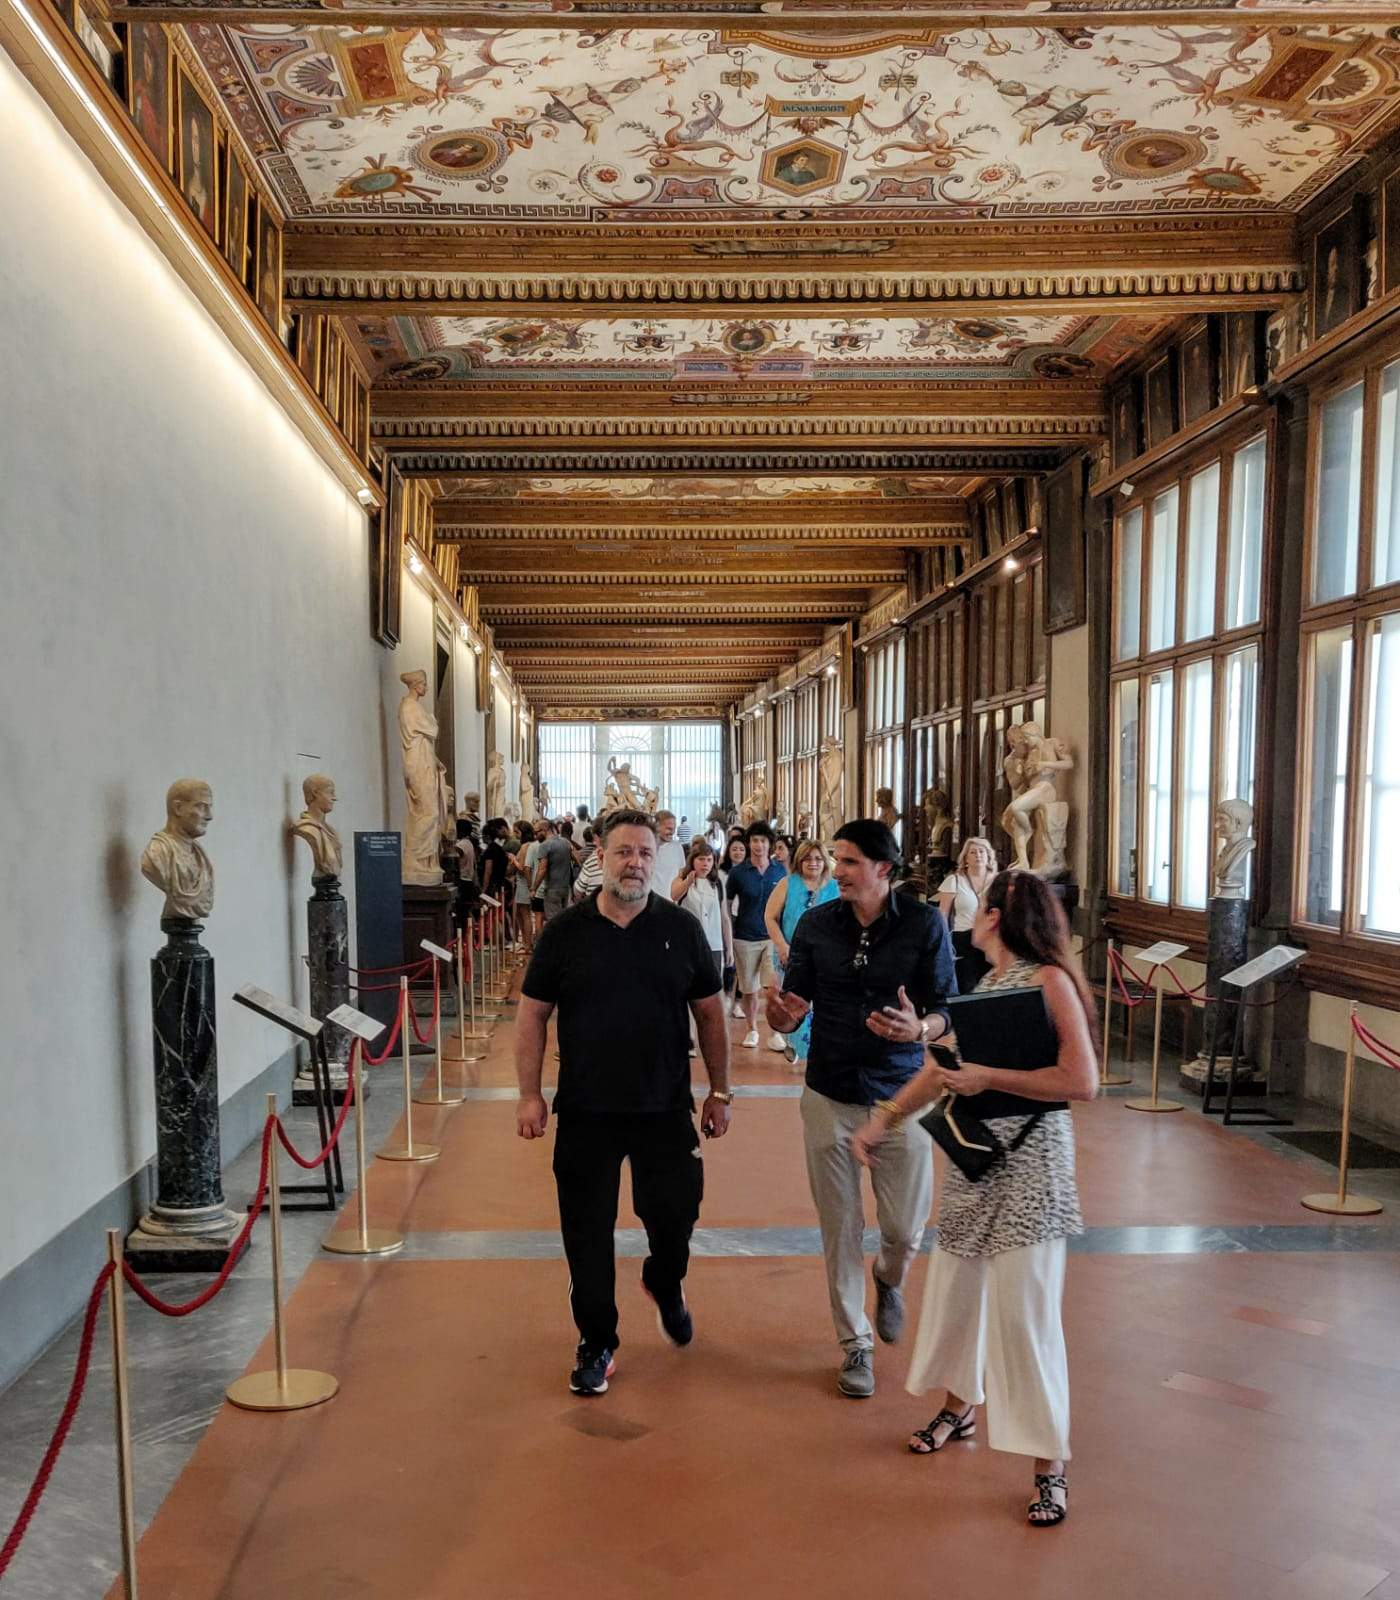 Russell Crowe is in Florence and visited the Uffizi.